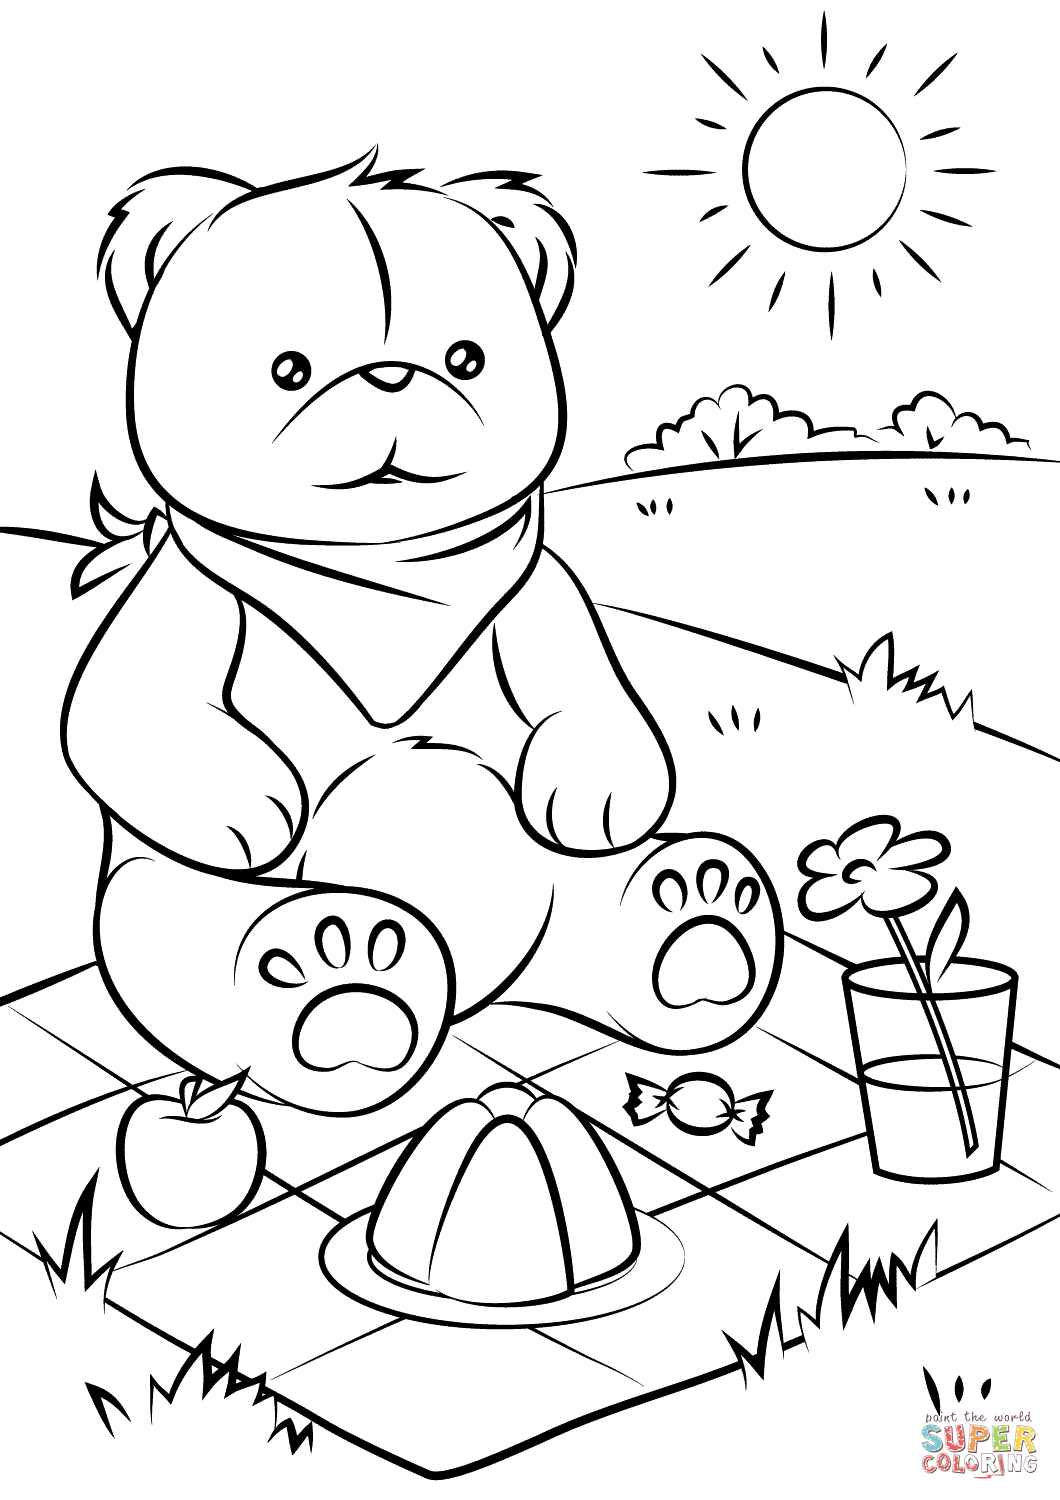 Valentine Teddy Bear Coloring Pages Teddy Bears Picnic Coloring Page Free Printable Coloring Pages